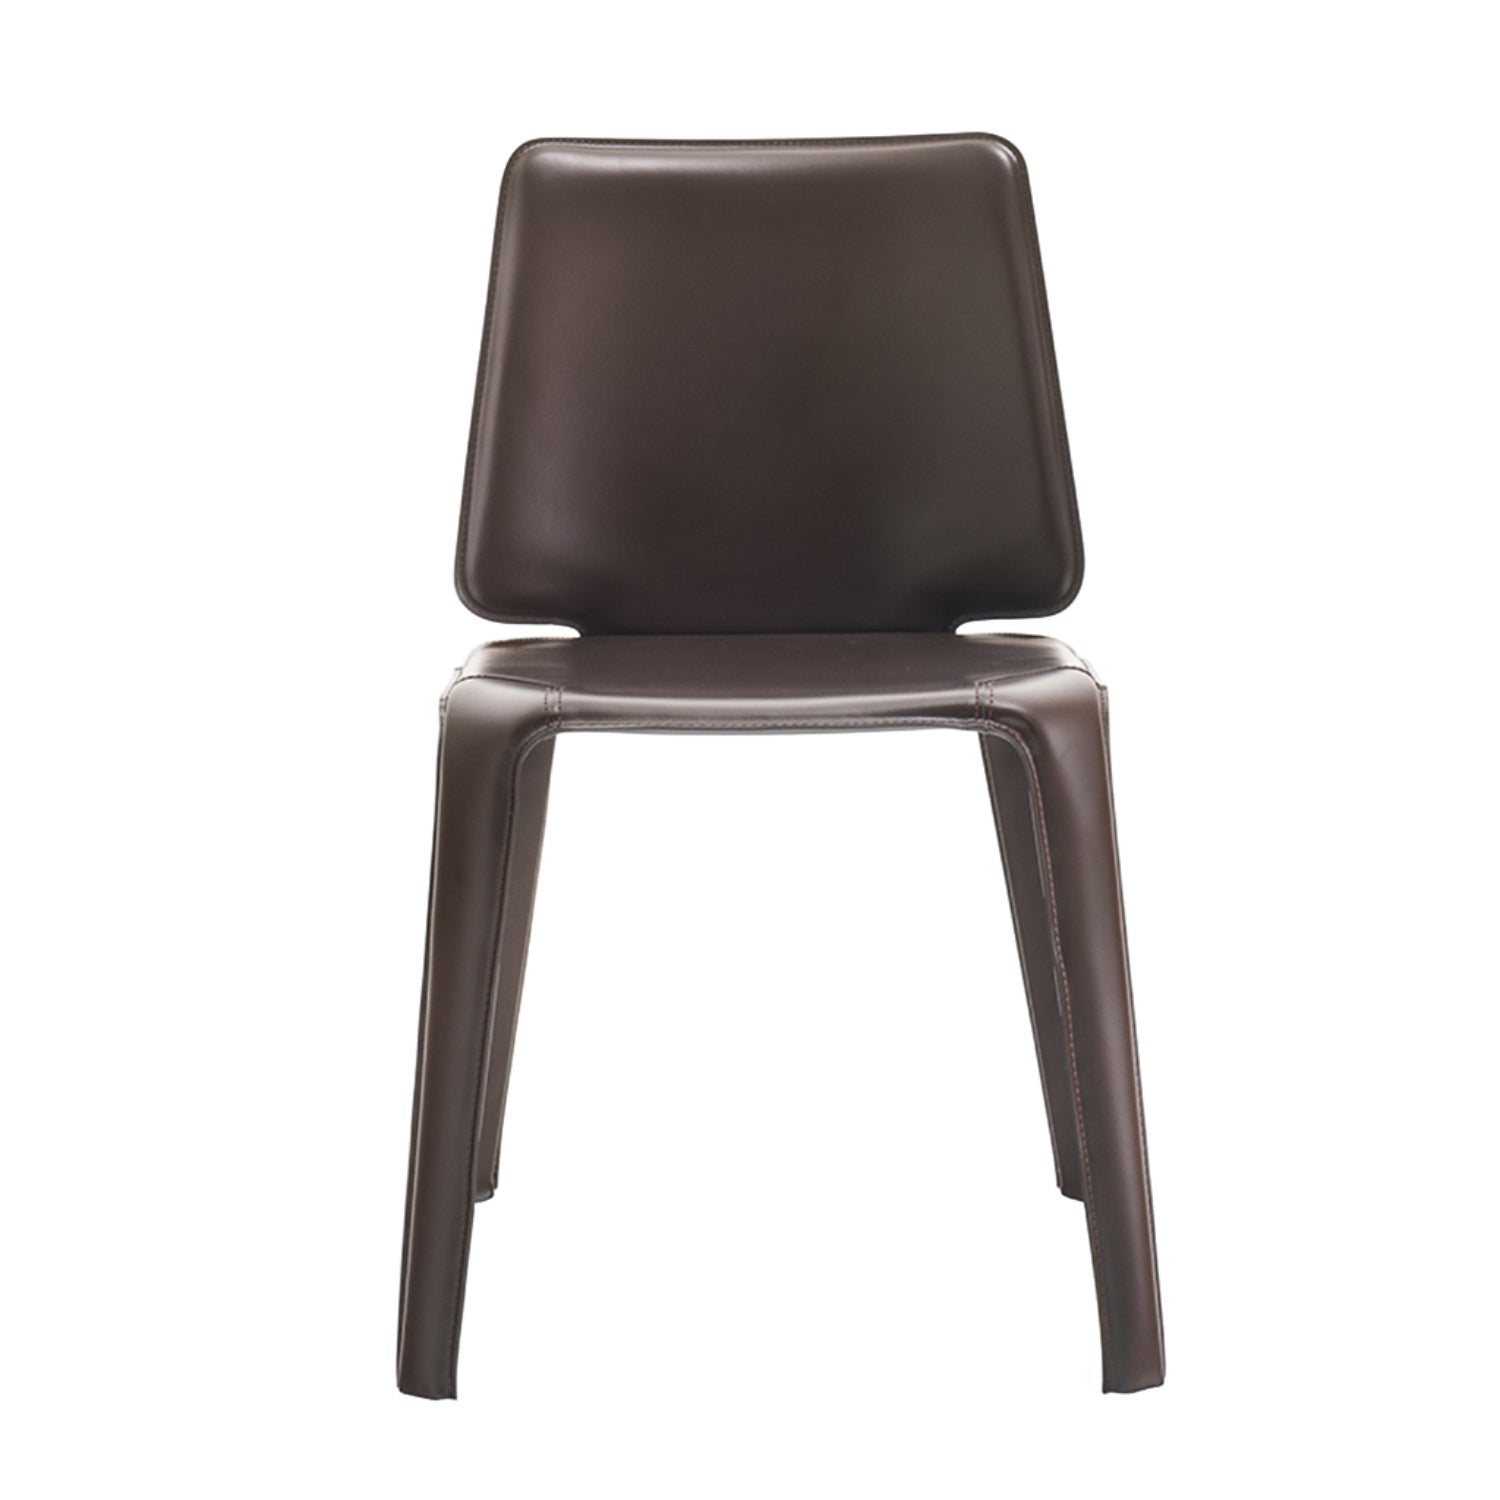 Pedrali Mood dining leather chair in brown